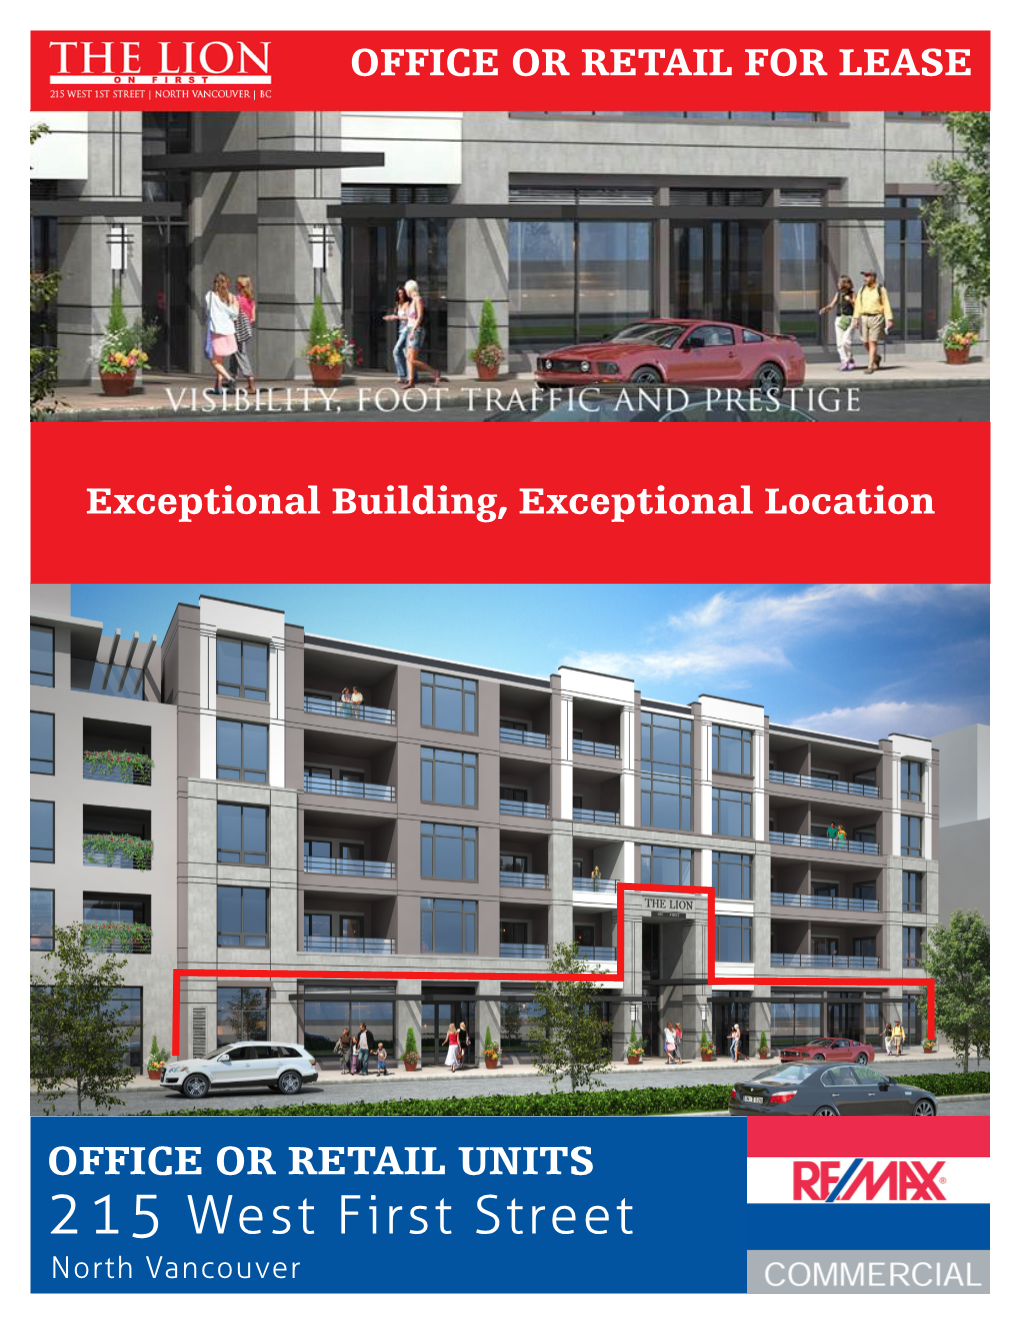 215 West First Street North Vancouver for LEASE OFFICE OR RETAIL UNITS